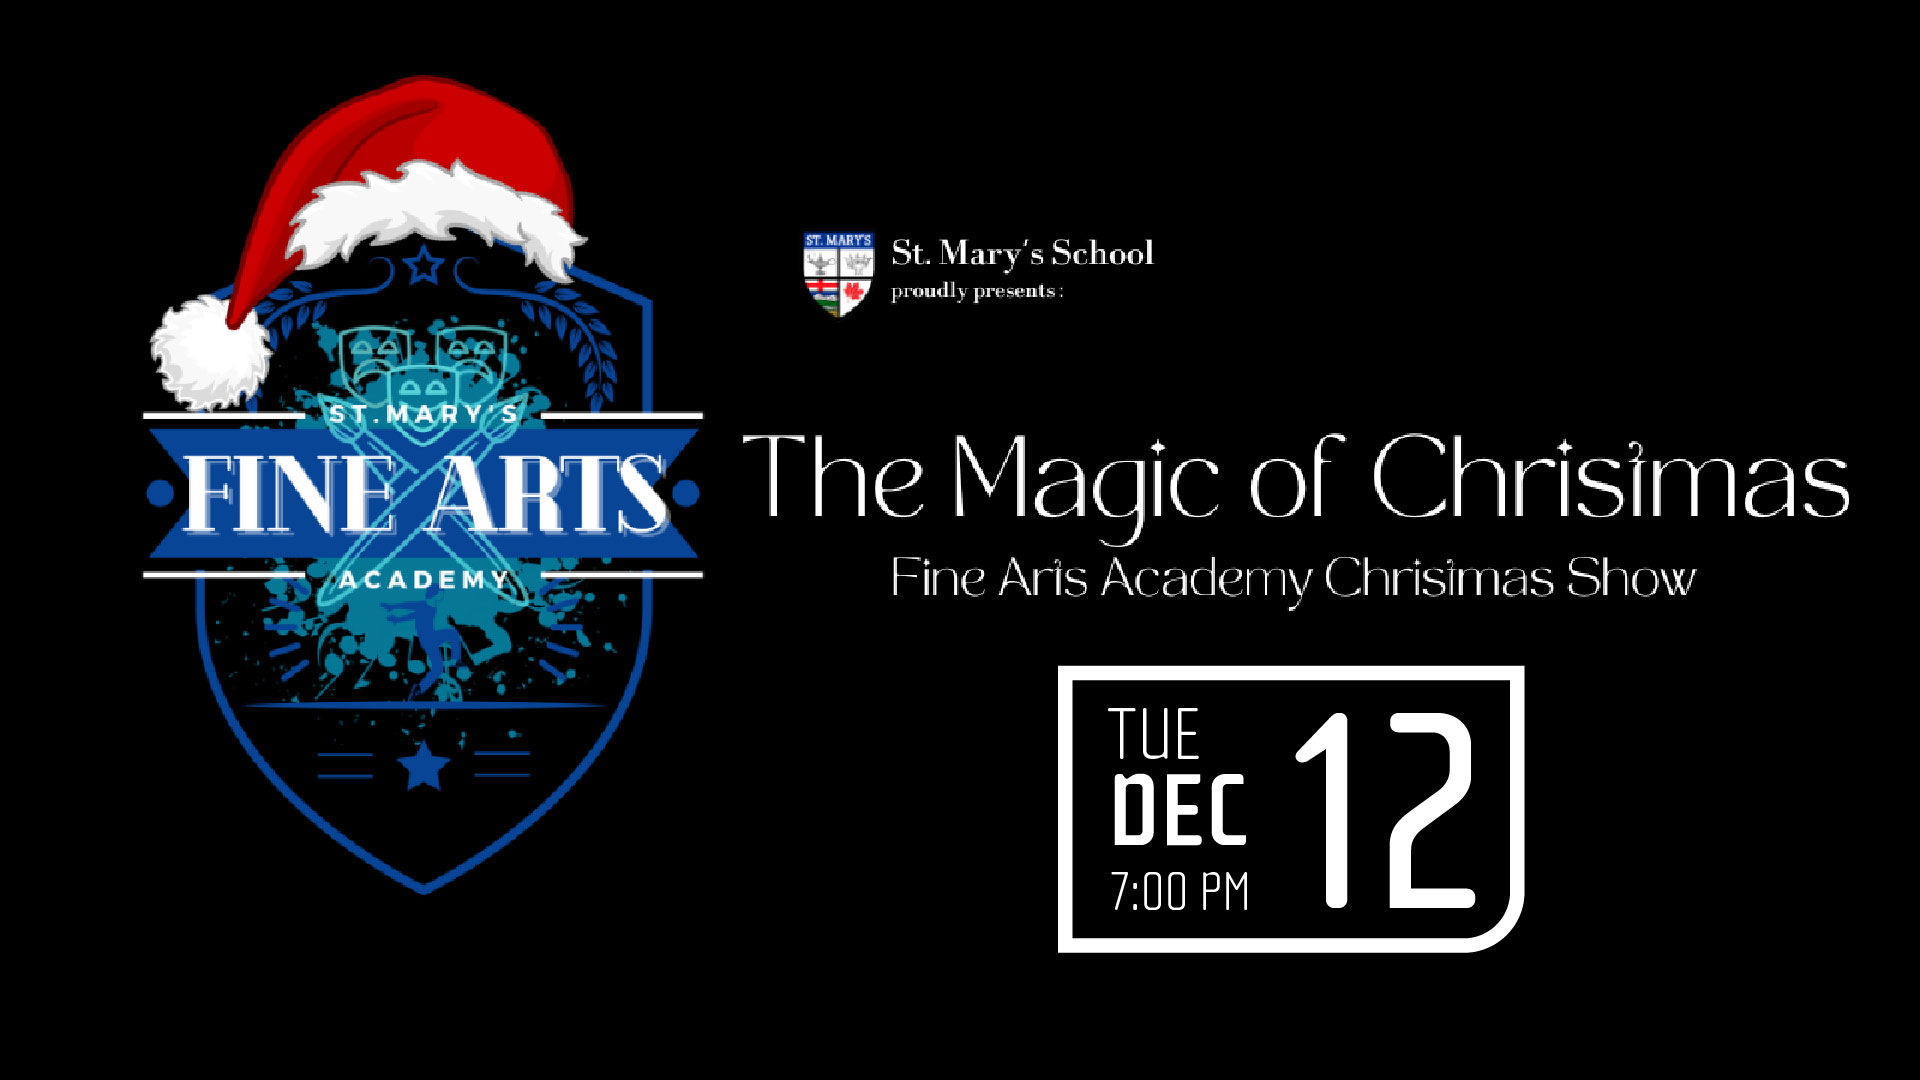 St Mary's School - The Magic of Christmas